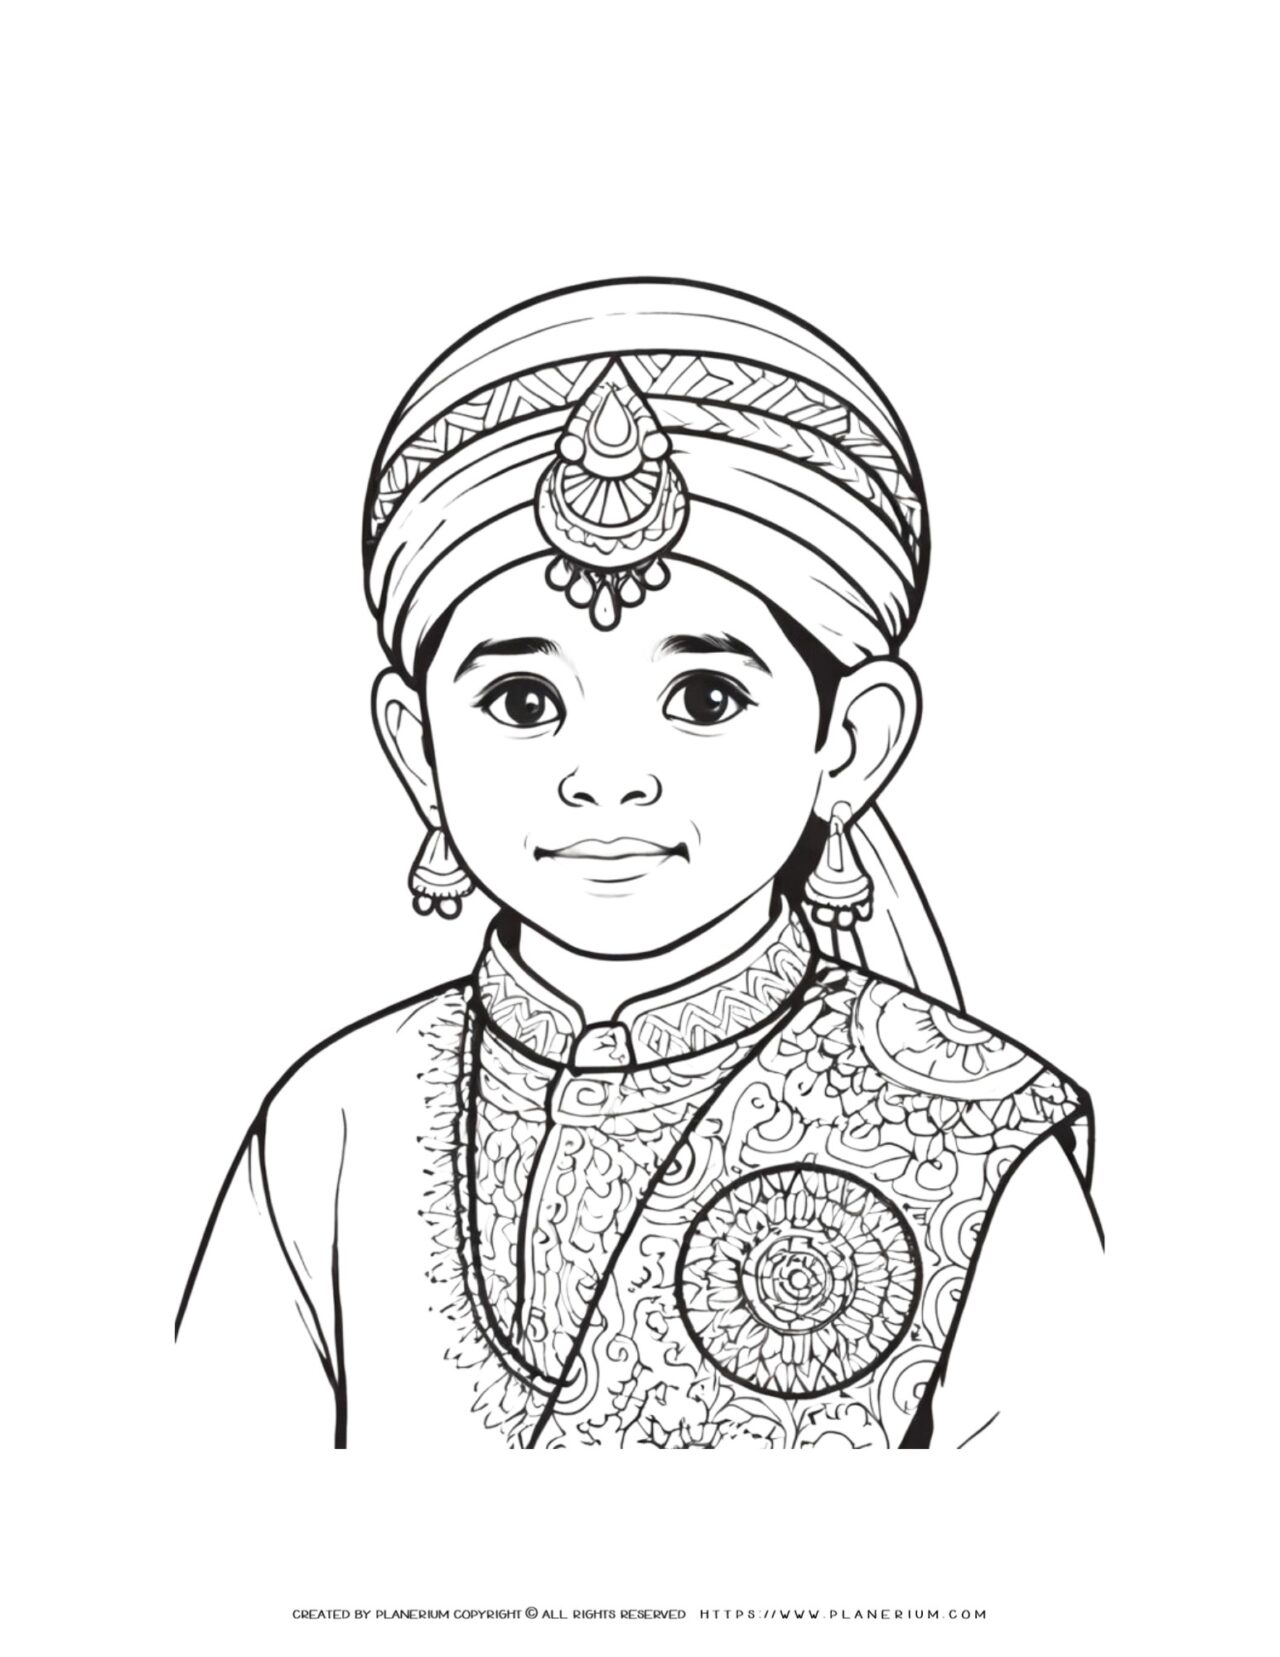 Indian-boy-portrait-illustration-with-traditional-clothes-detailed-coloring-page-for-adults